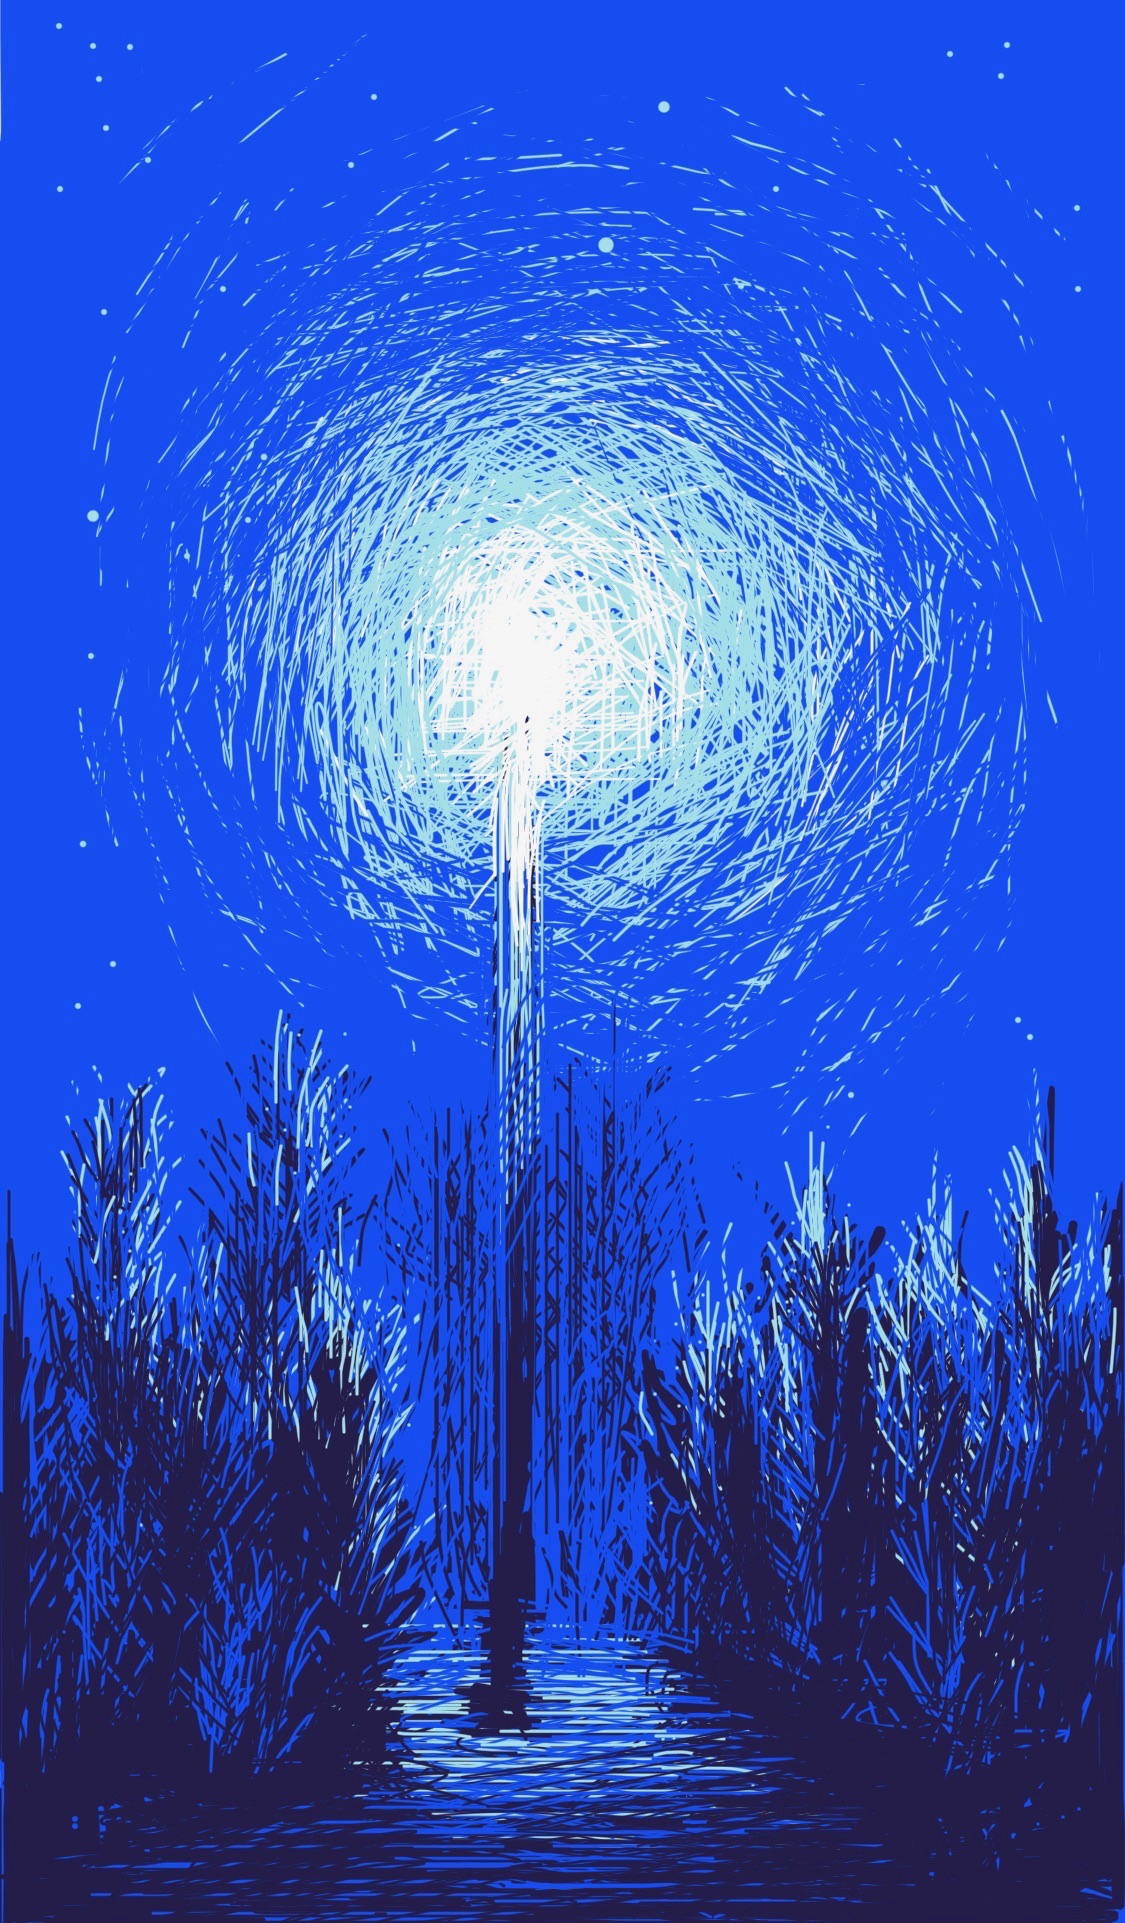 A very tall lamp stands in a wintry forest at night, surrounded by trees